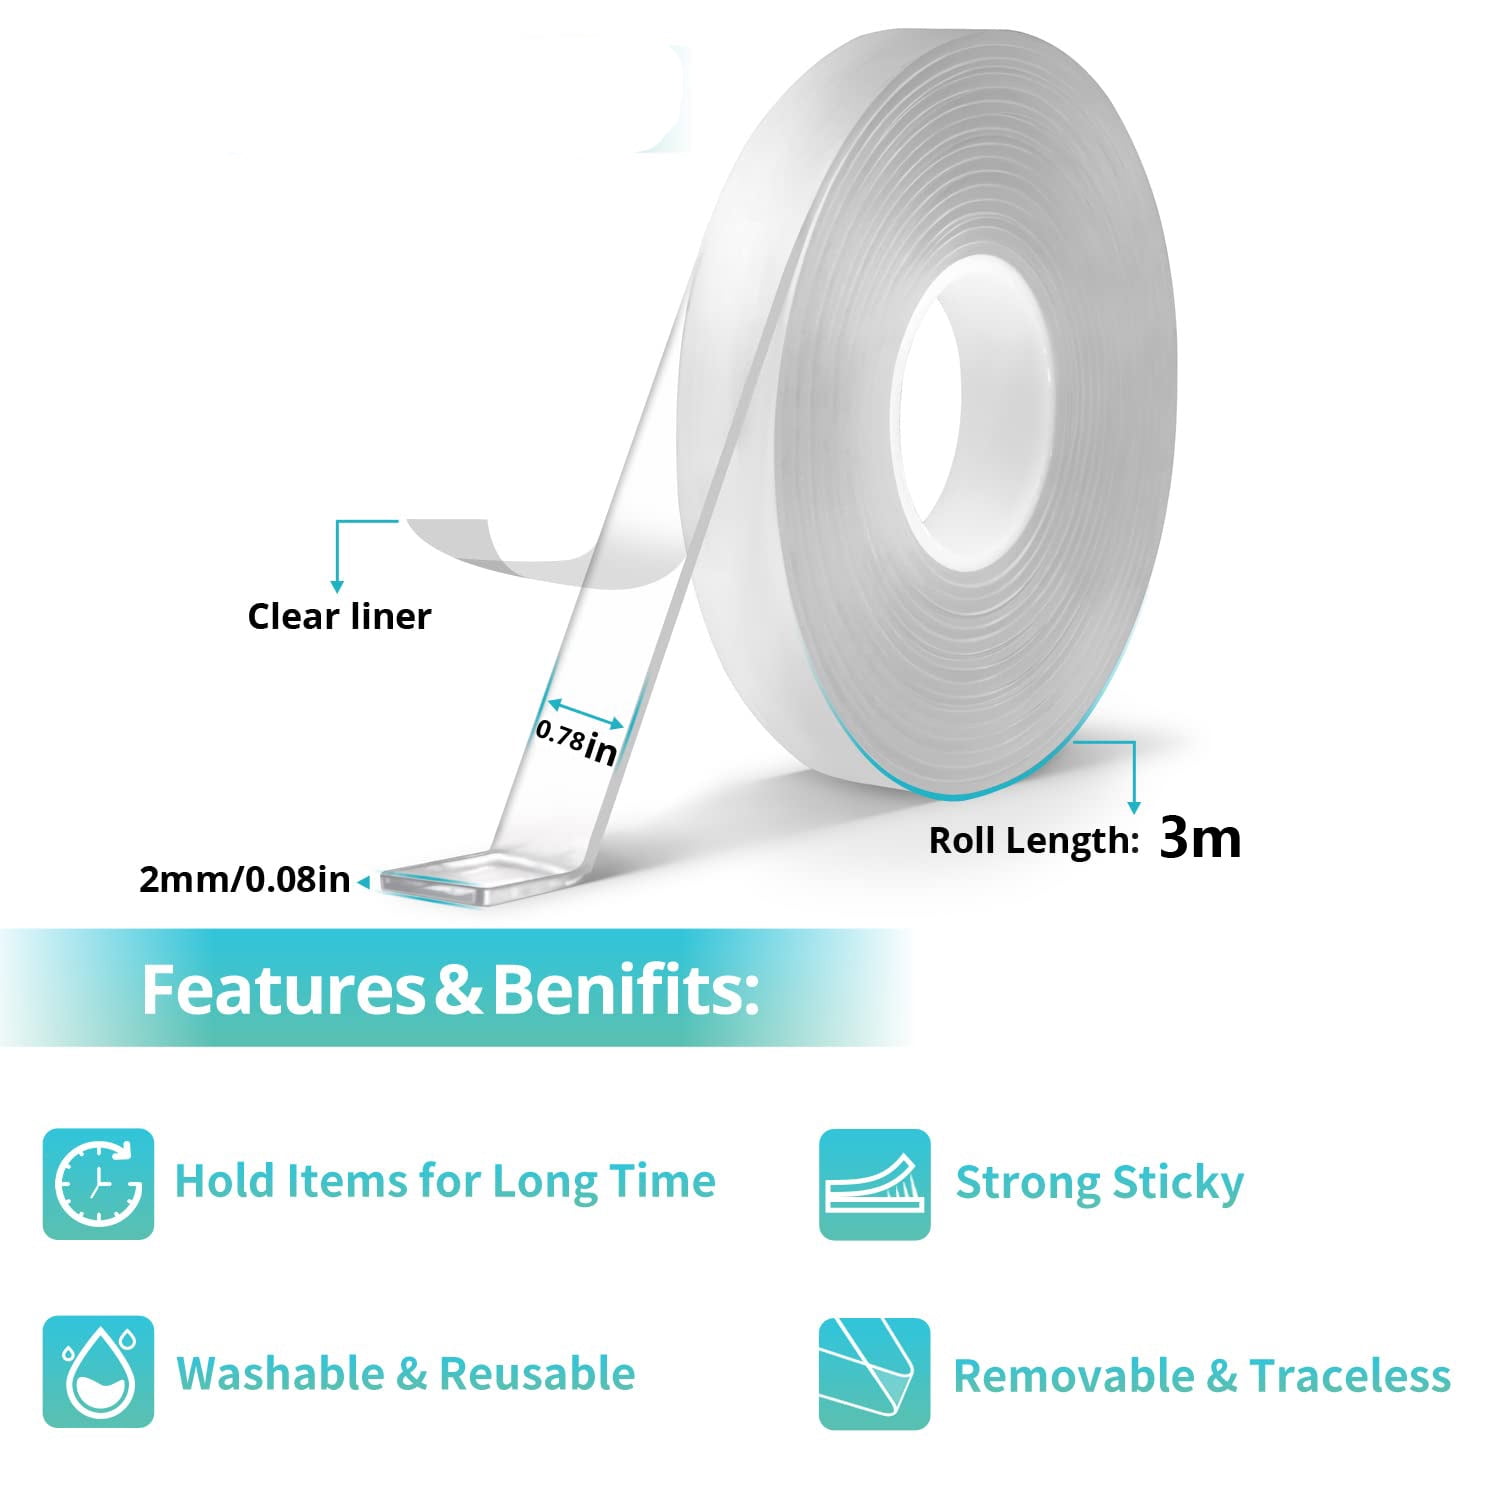 3M Natural Double-Sided Paper Tape: 1 Wide, 36 yd Long, 9 Mil Thick, Rubber Adhesive - Continuous Roll, Series 401M | Part #00051115320552